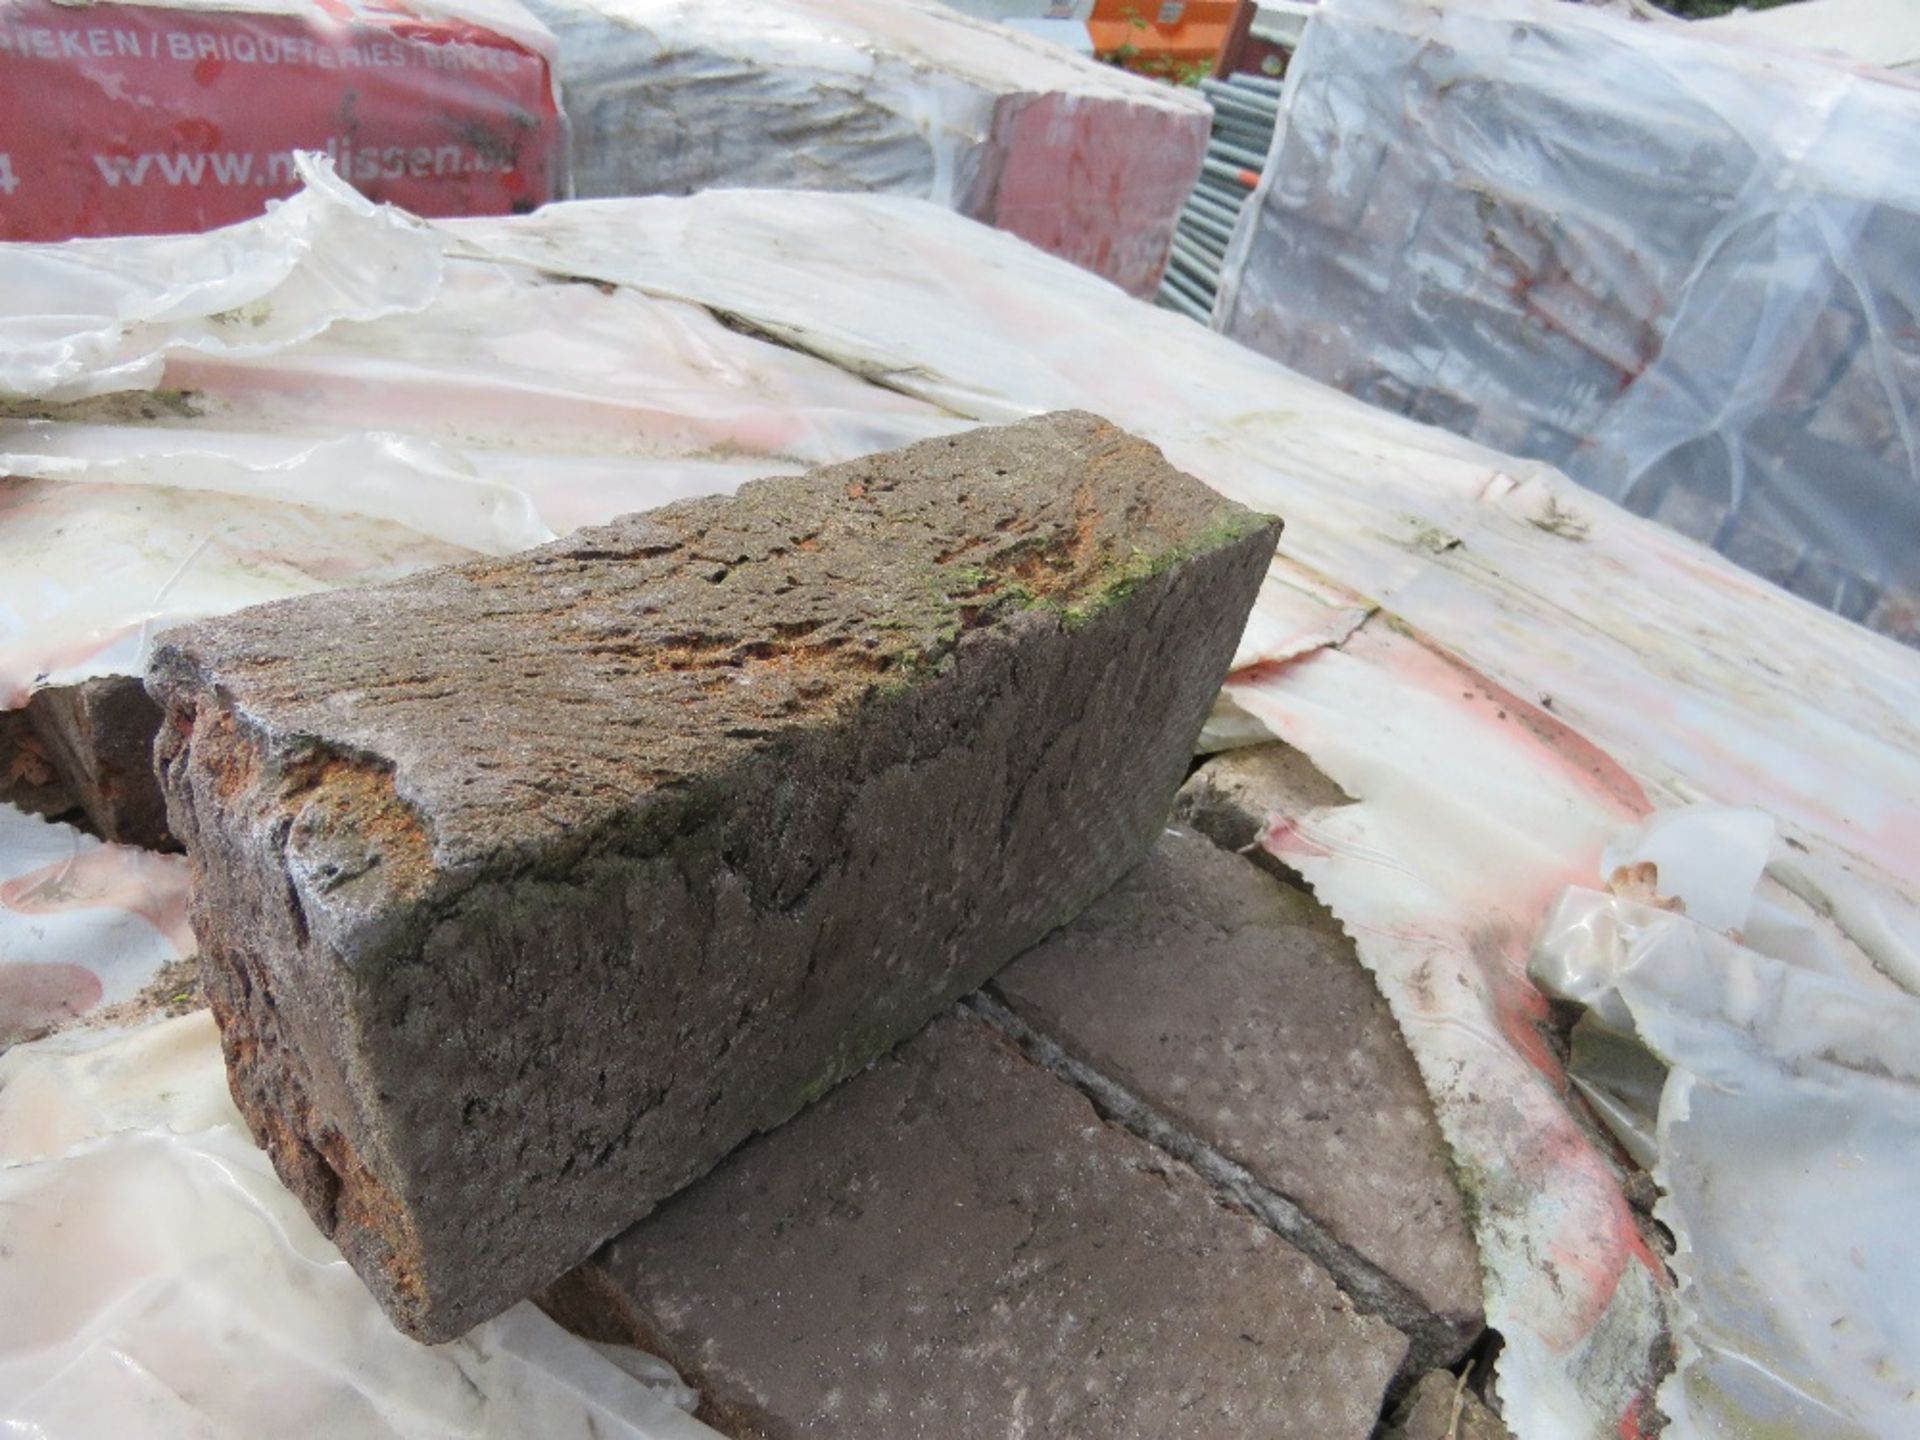 3 X PACKS OF RUSHINGTON ANTIQUE (DALI) BRICKS, CODE T33. BELIEVED TO BE 730NO IN EACH PACK. THIS - Image 12 of 17